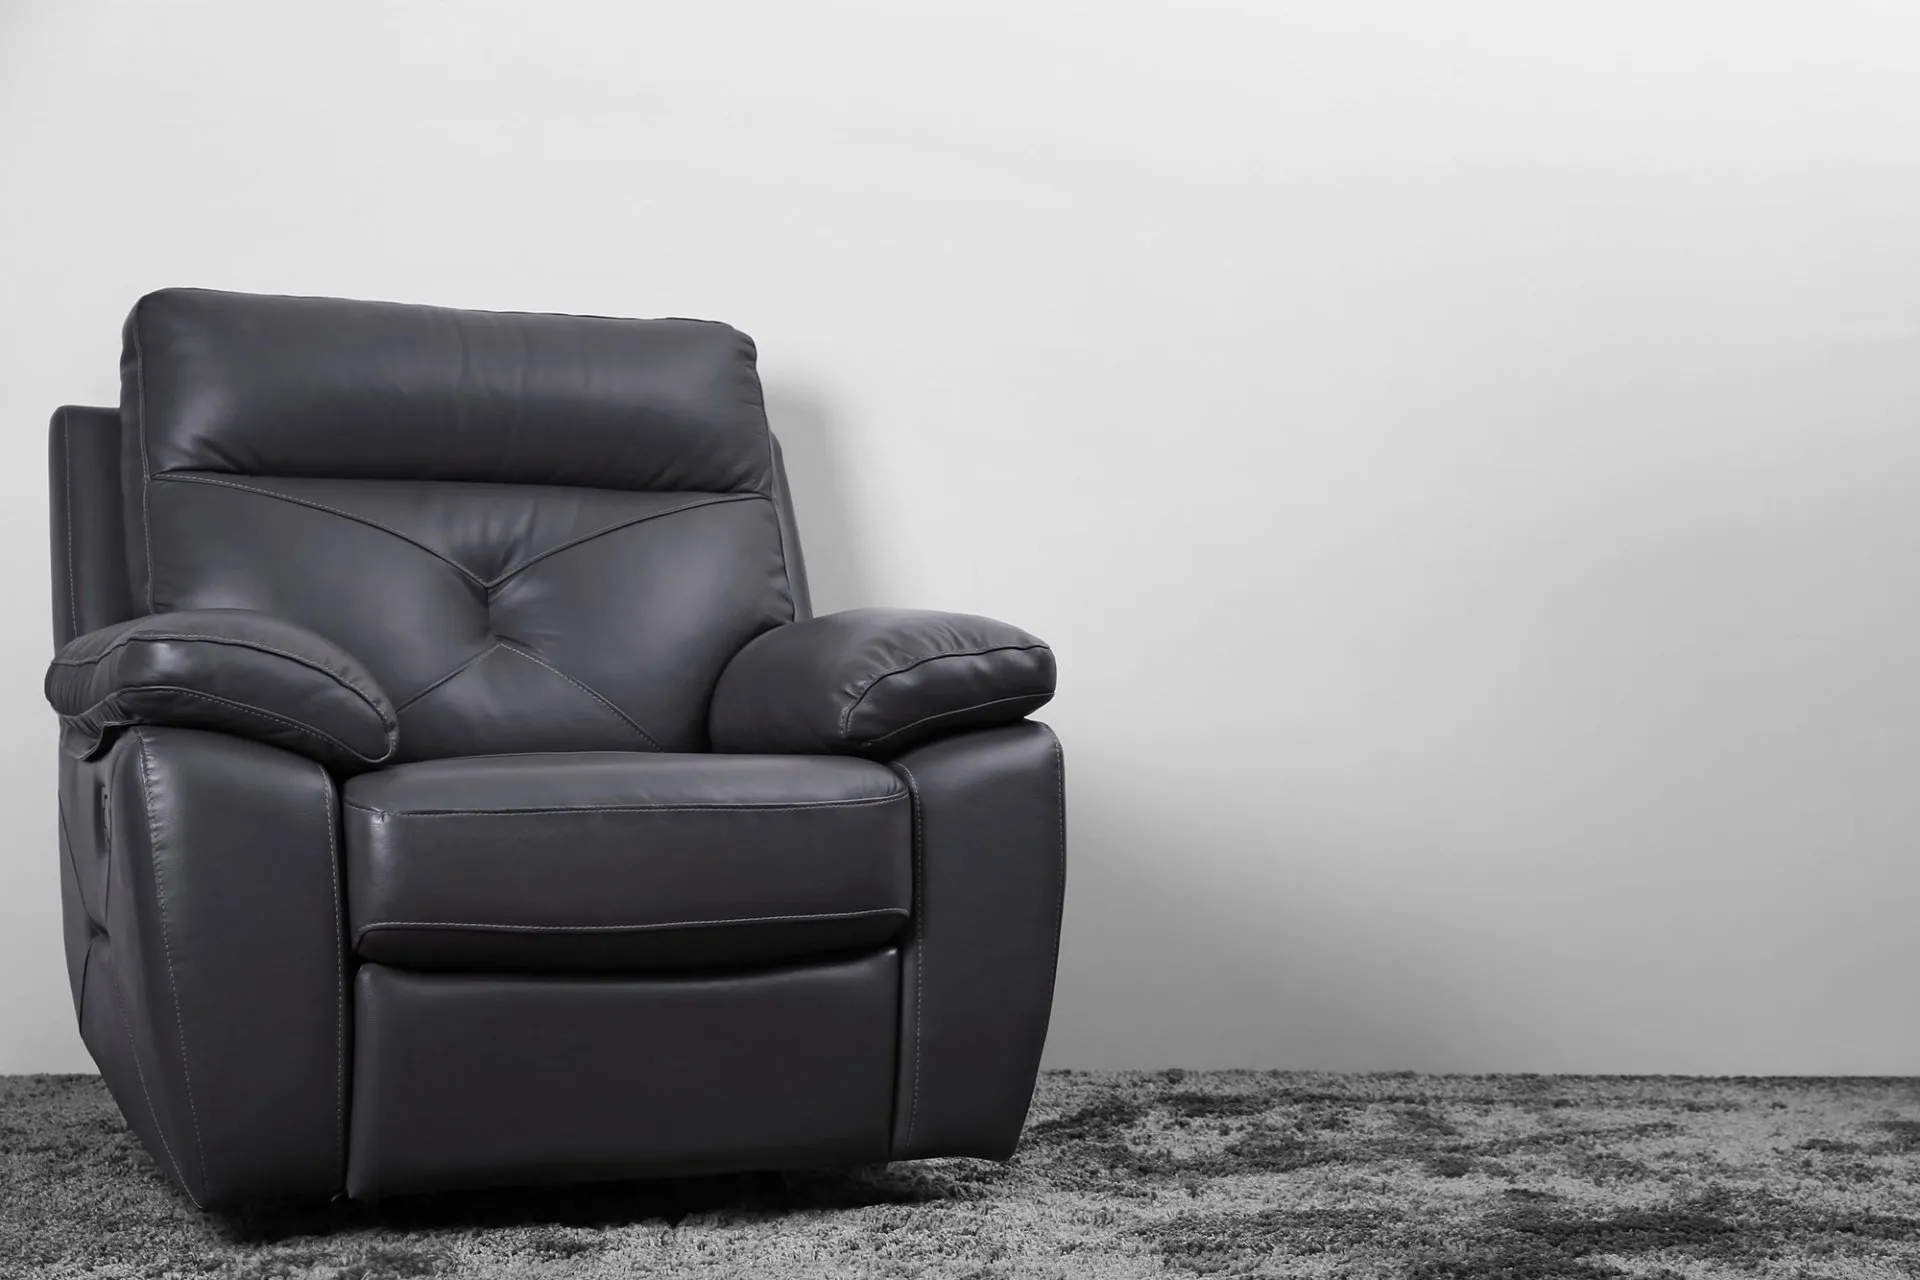 A black leather chair in front of a grey background